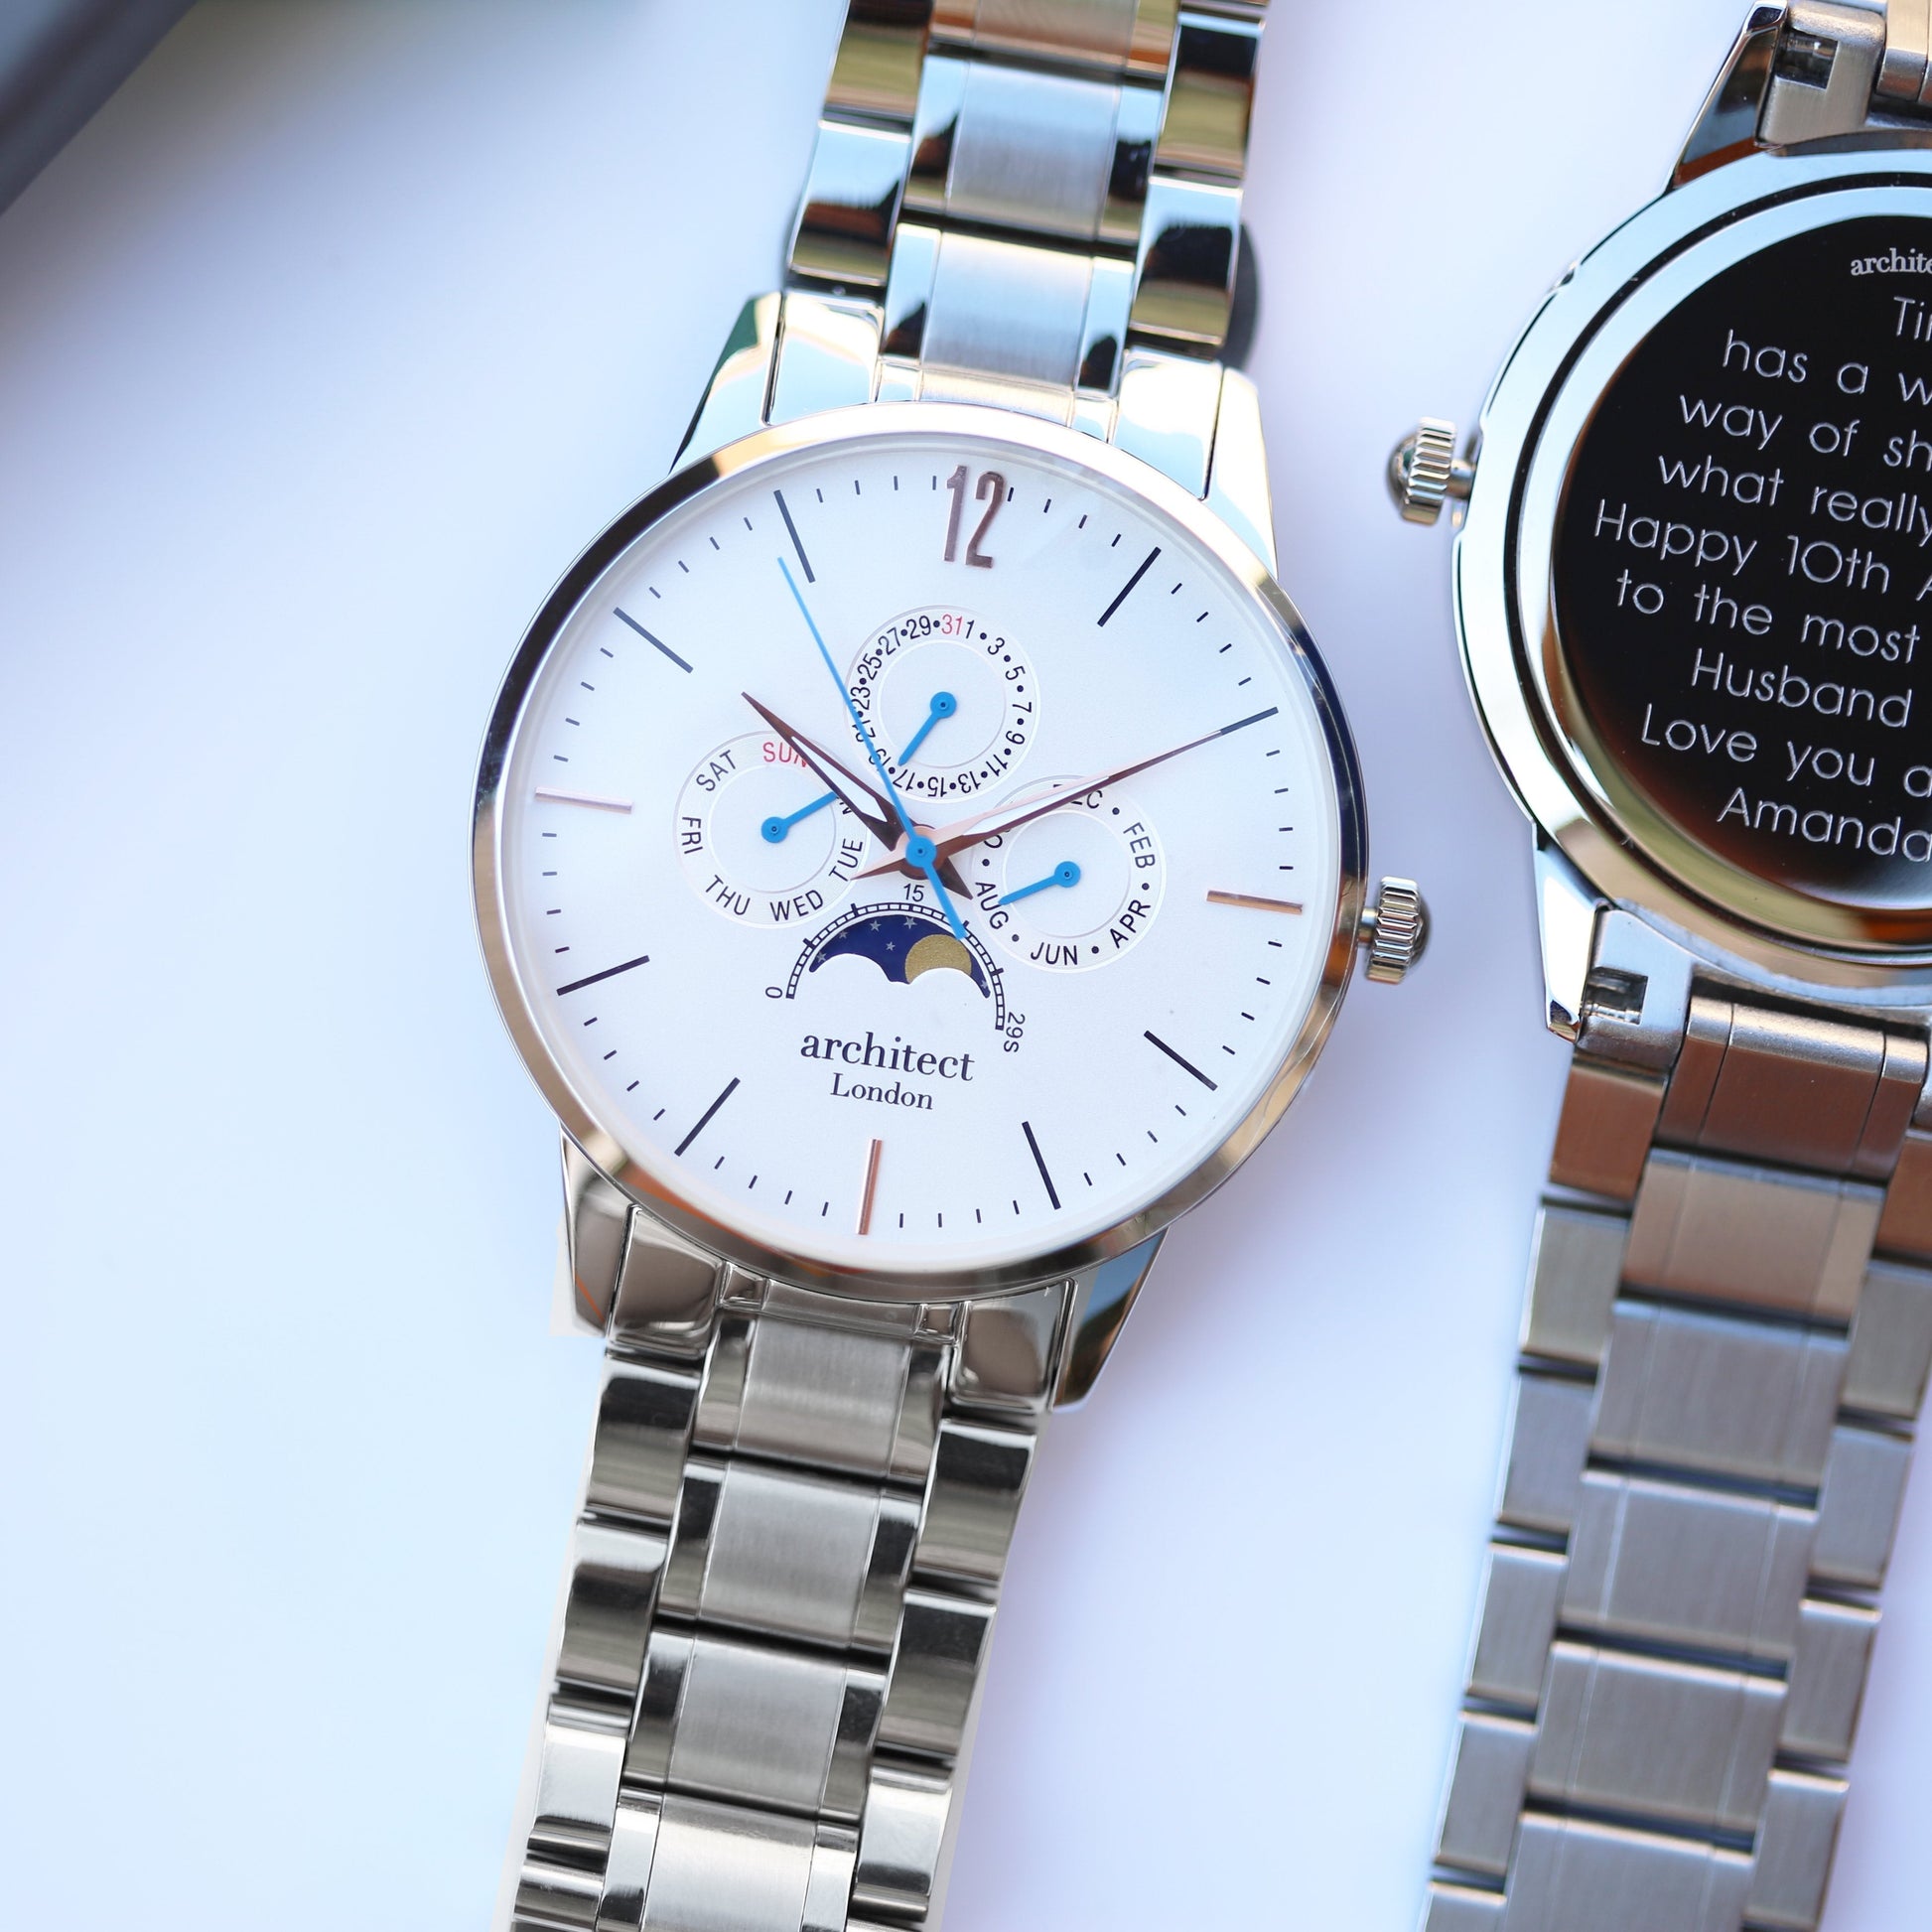 Personalized Men's Watches - Men's Architect Apollo Personalized Watch In White 